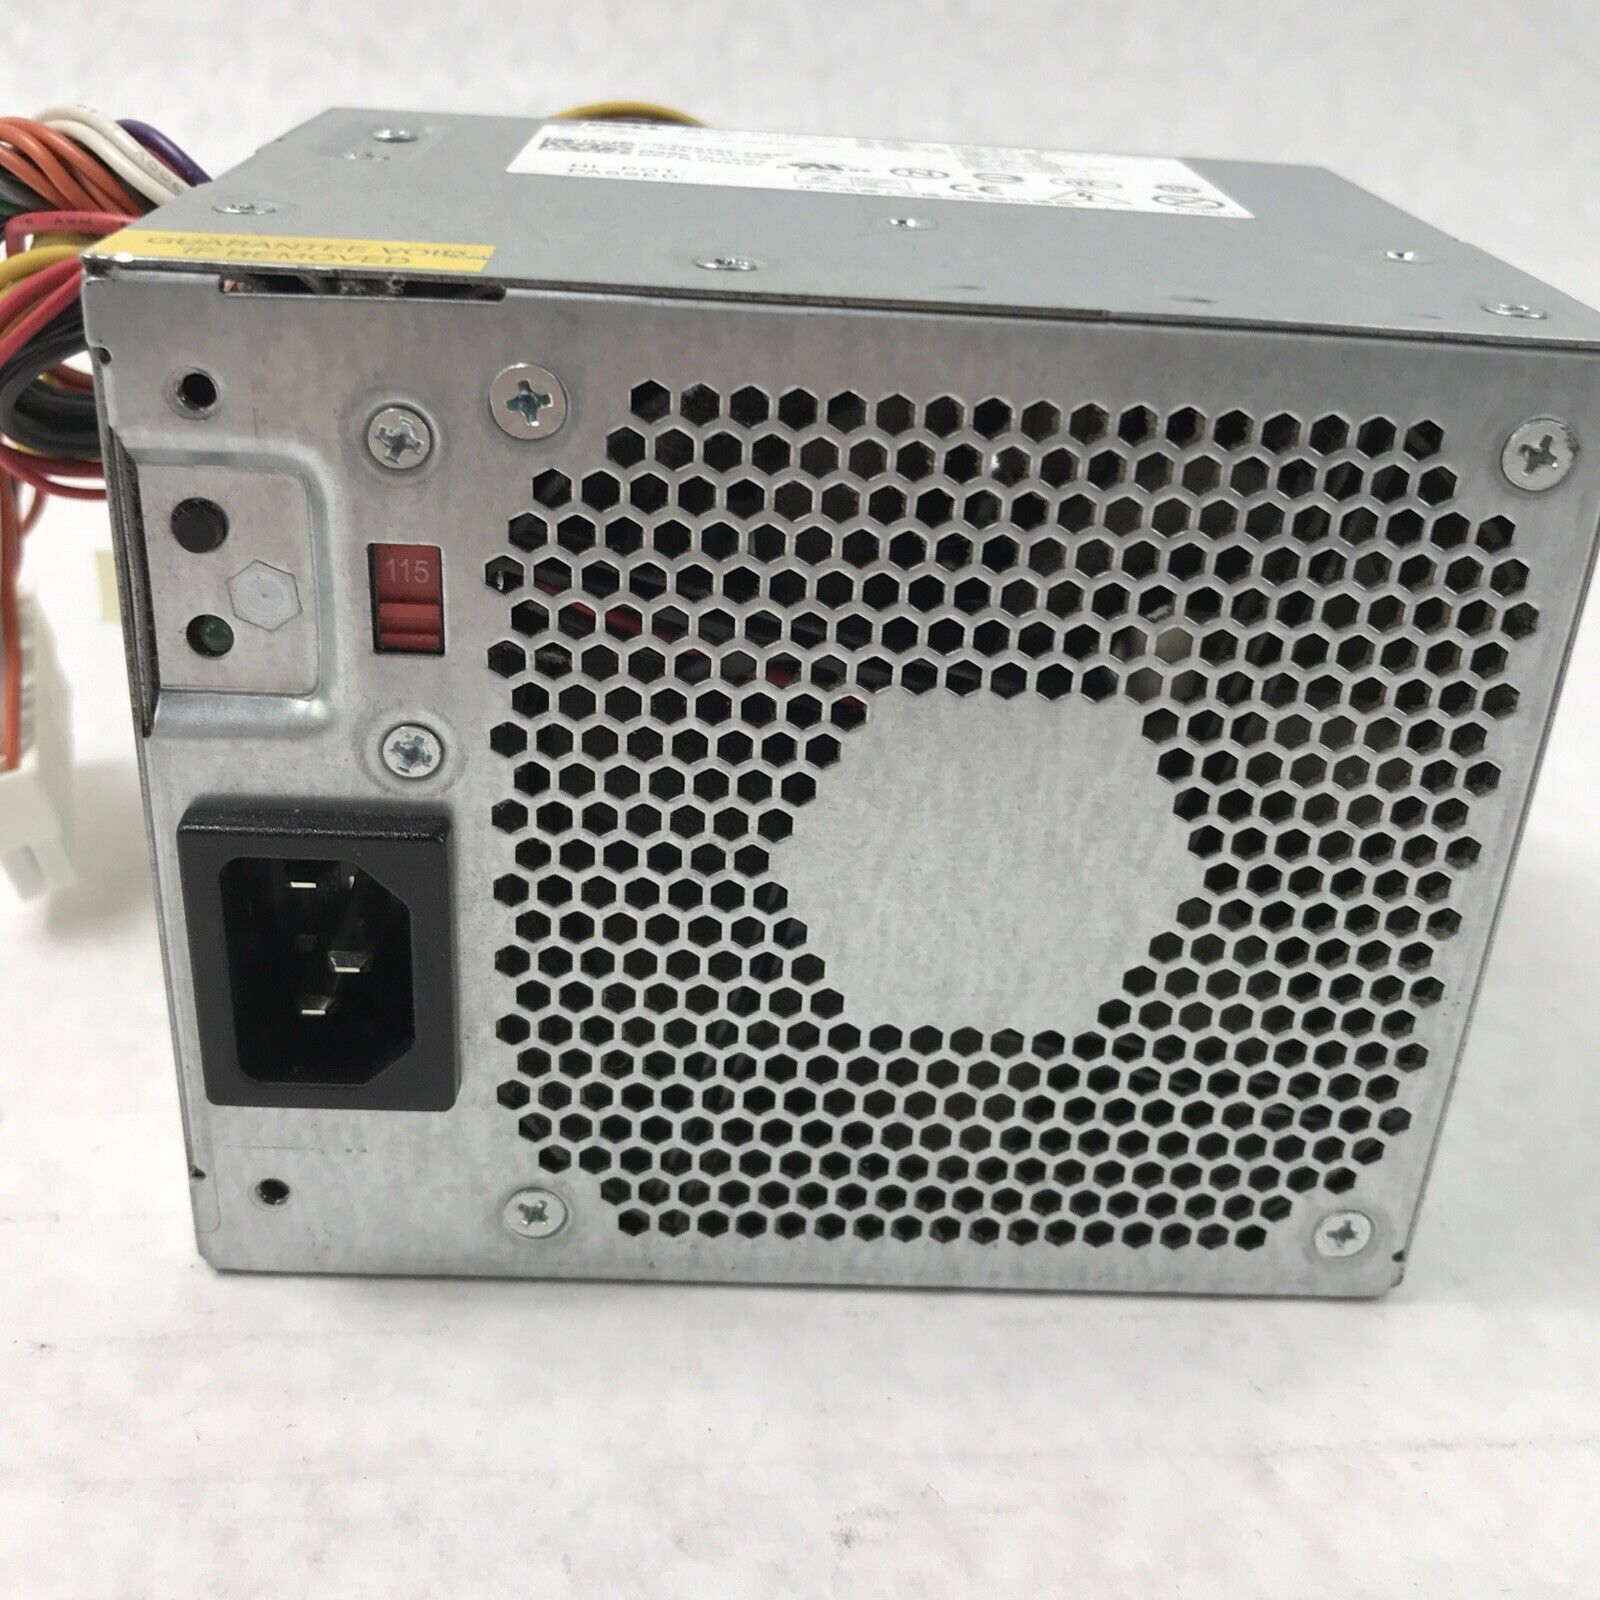 Genuine Dell H235PD-01 235W 60Hz 240V Power Supply (Tested and Working)